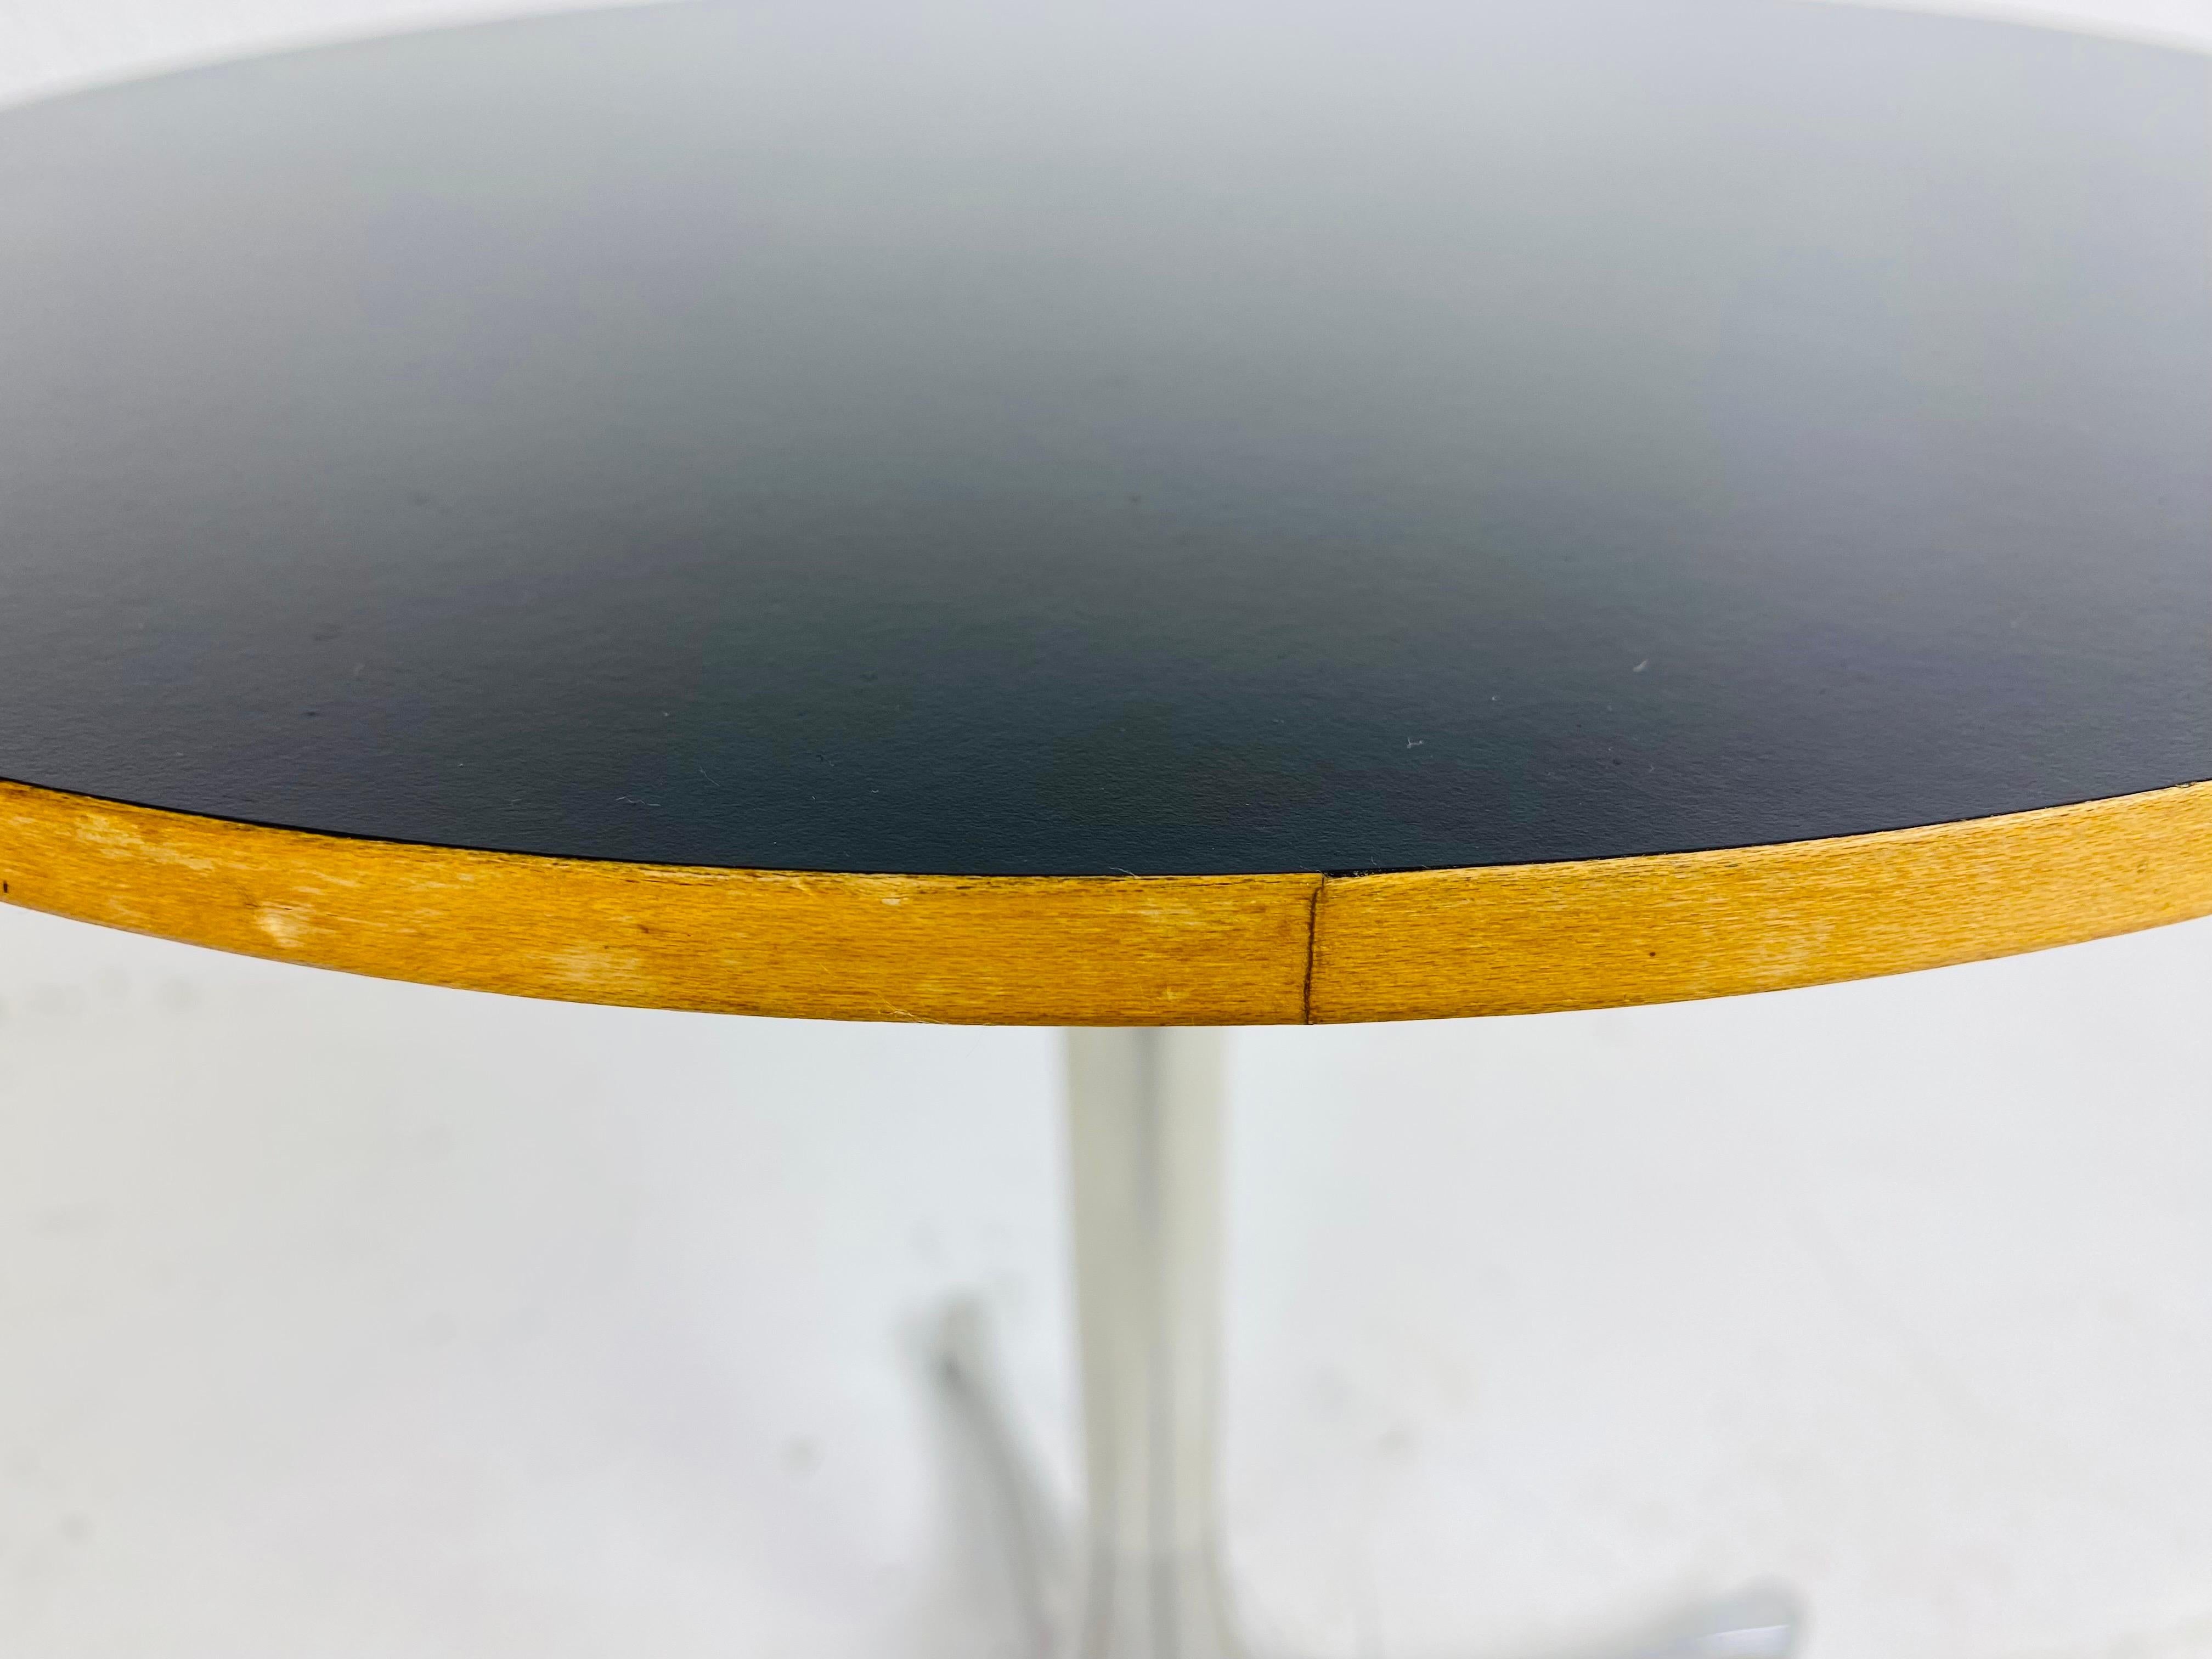 This is a mid century modern Diminutive martini table by Herman Miller. This martini table has a black laminate top with a dark walnut finished edge. The base is chrome with four expanded legs. This is a classic Herman Miller table circa 1970.